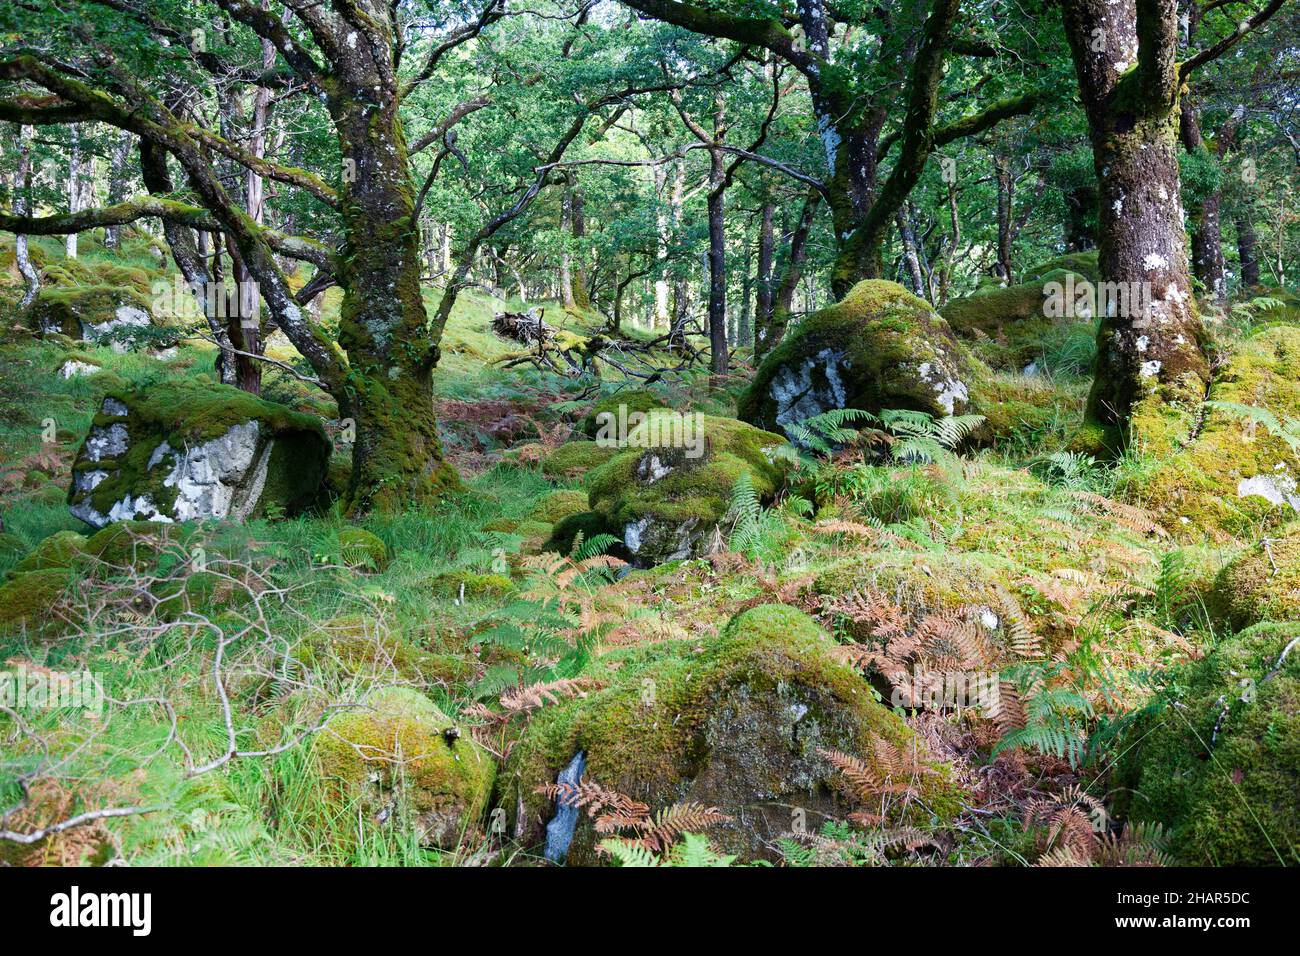 Mossy oak treees and boulders in the Ariundle oakwood national nature reserve,a remnant of ancient woodlands in West Scotland, UK Stock Photo